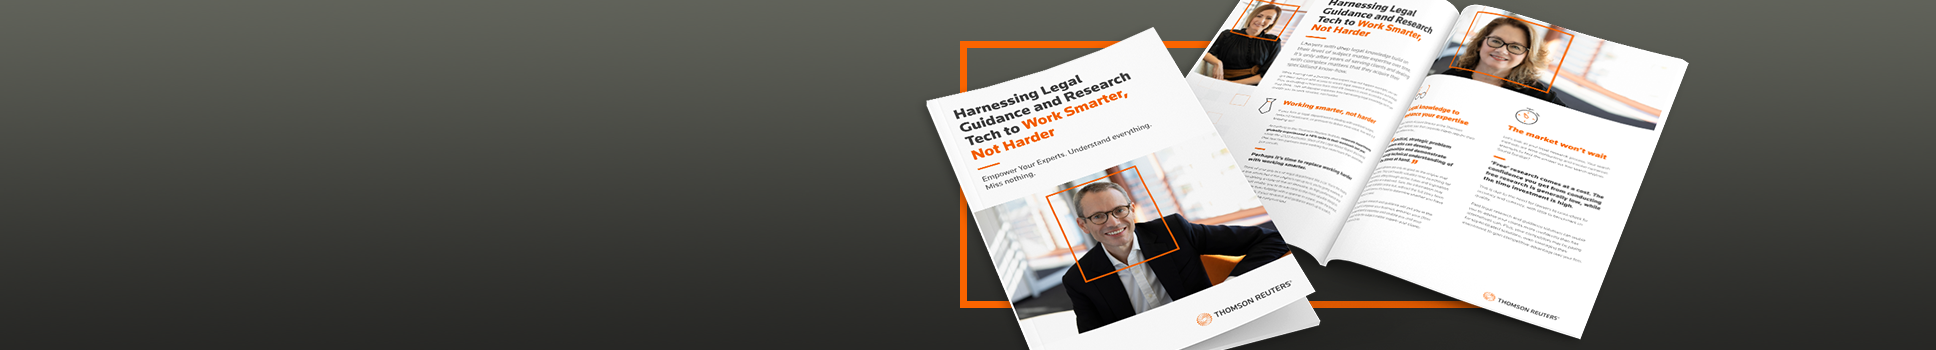 Harnessing Legal Guidance and Research Tech to Work Smarter